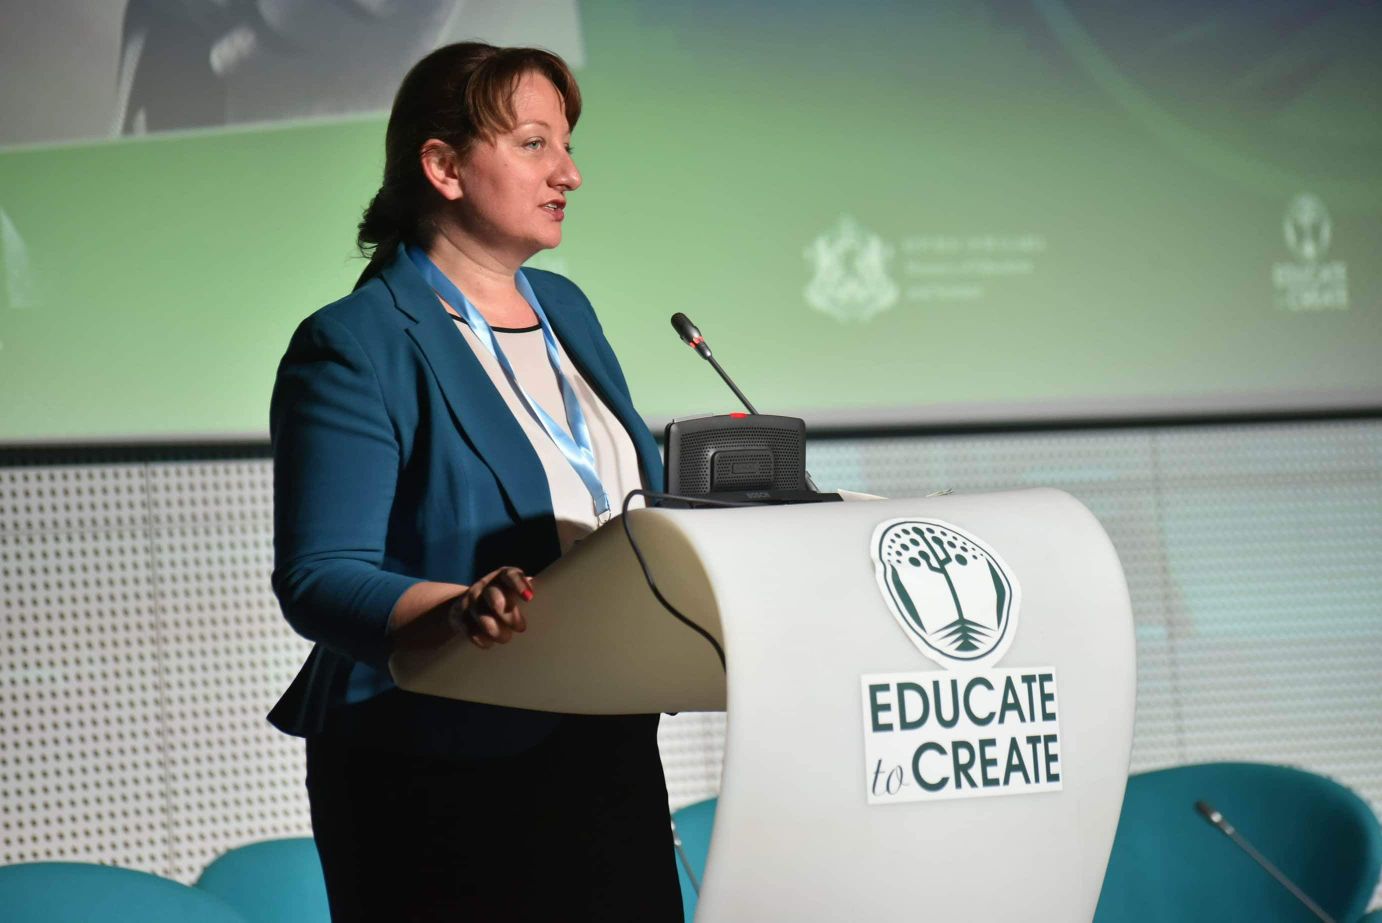 THE BULGARIAN PRESIDENCY INITIATED SOFIA CALL FOR ACTION ON DIGITAL SKILLS AND EDUCATION